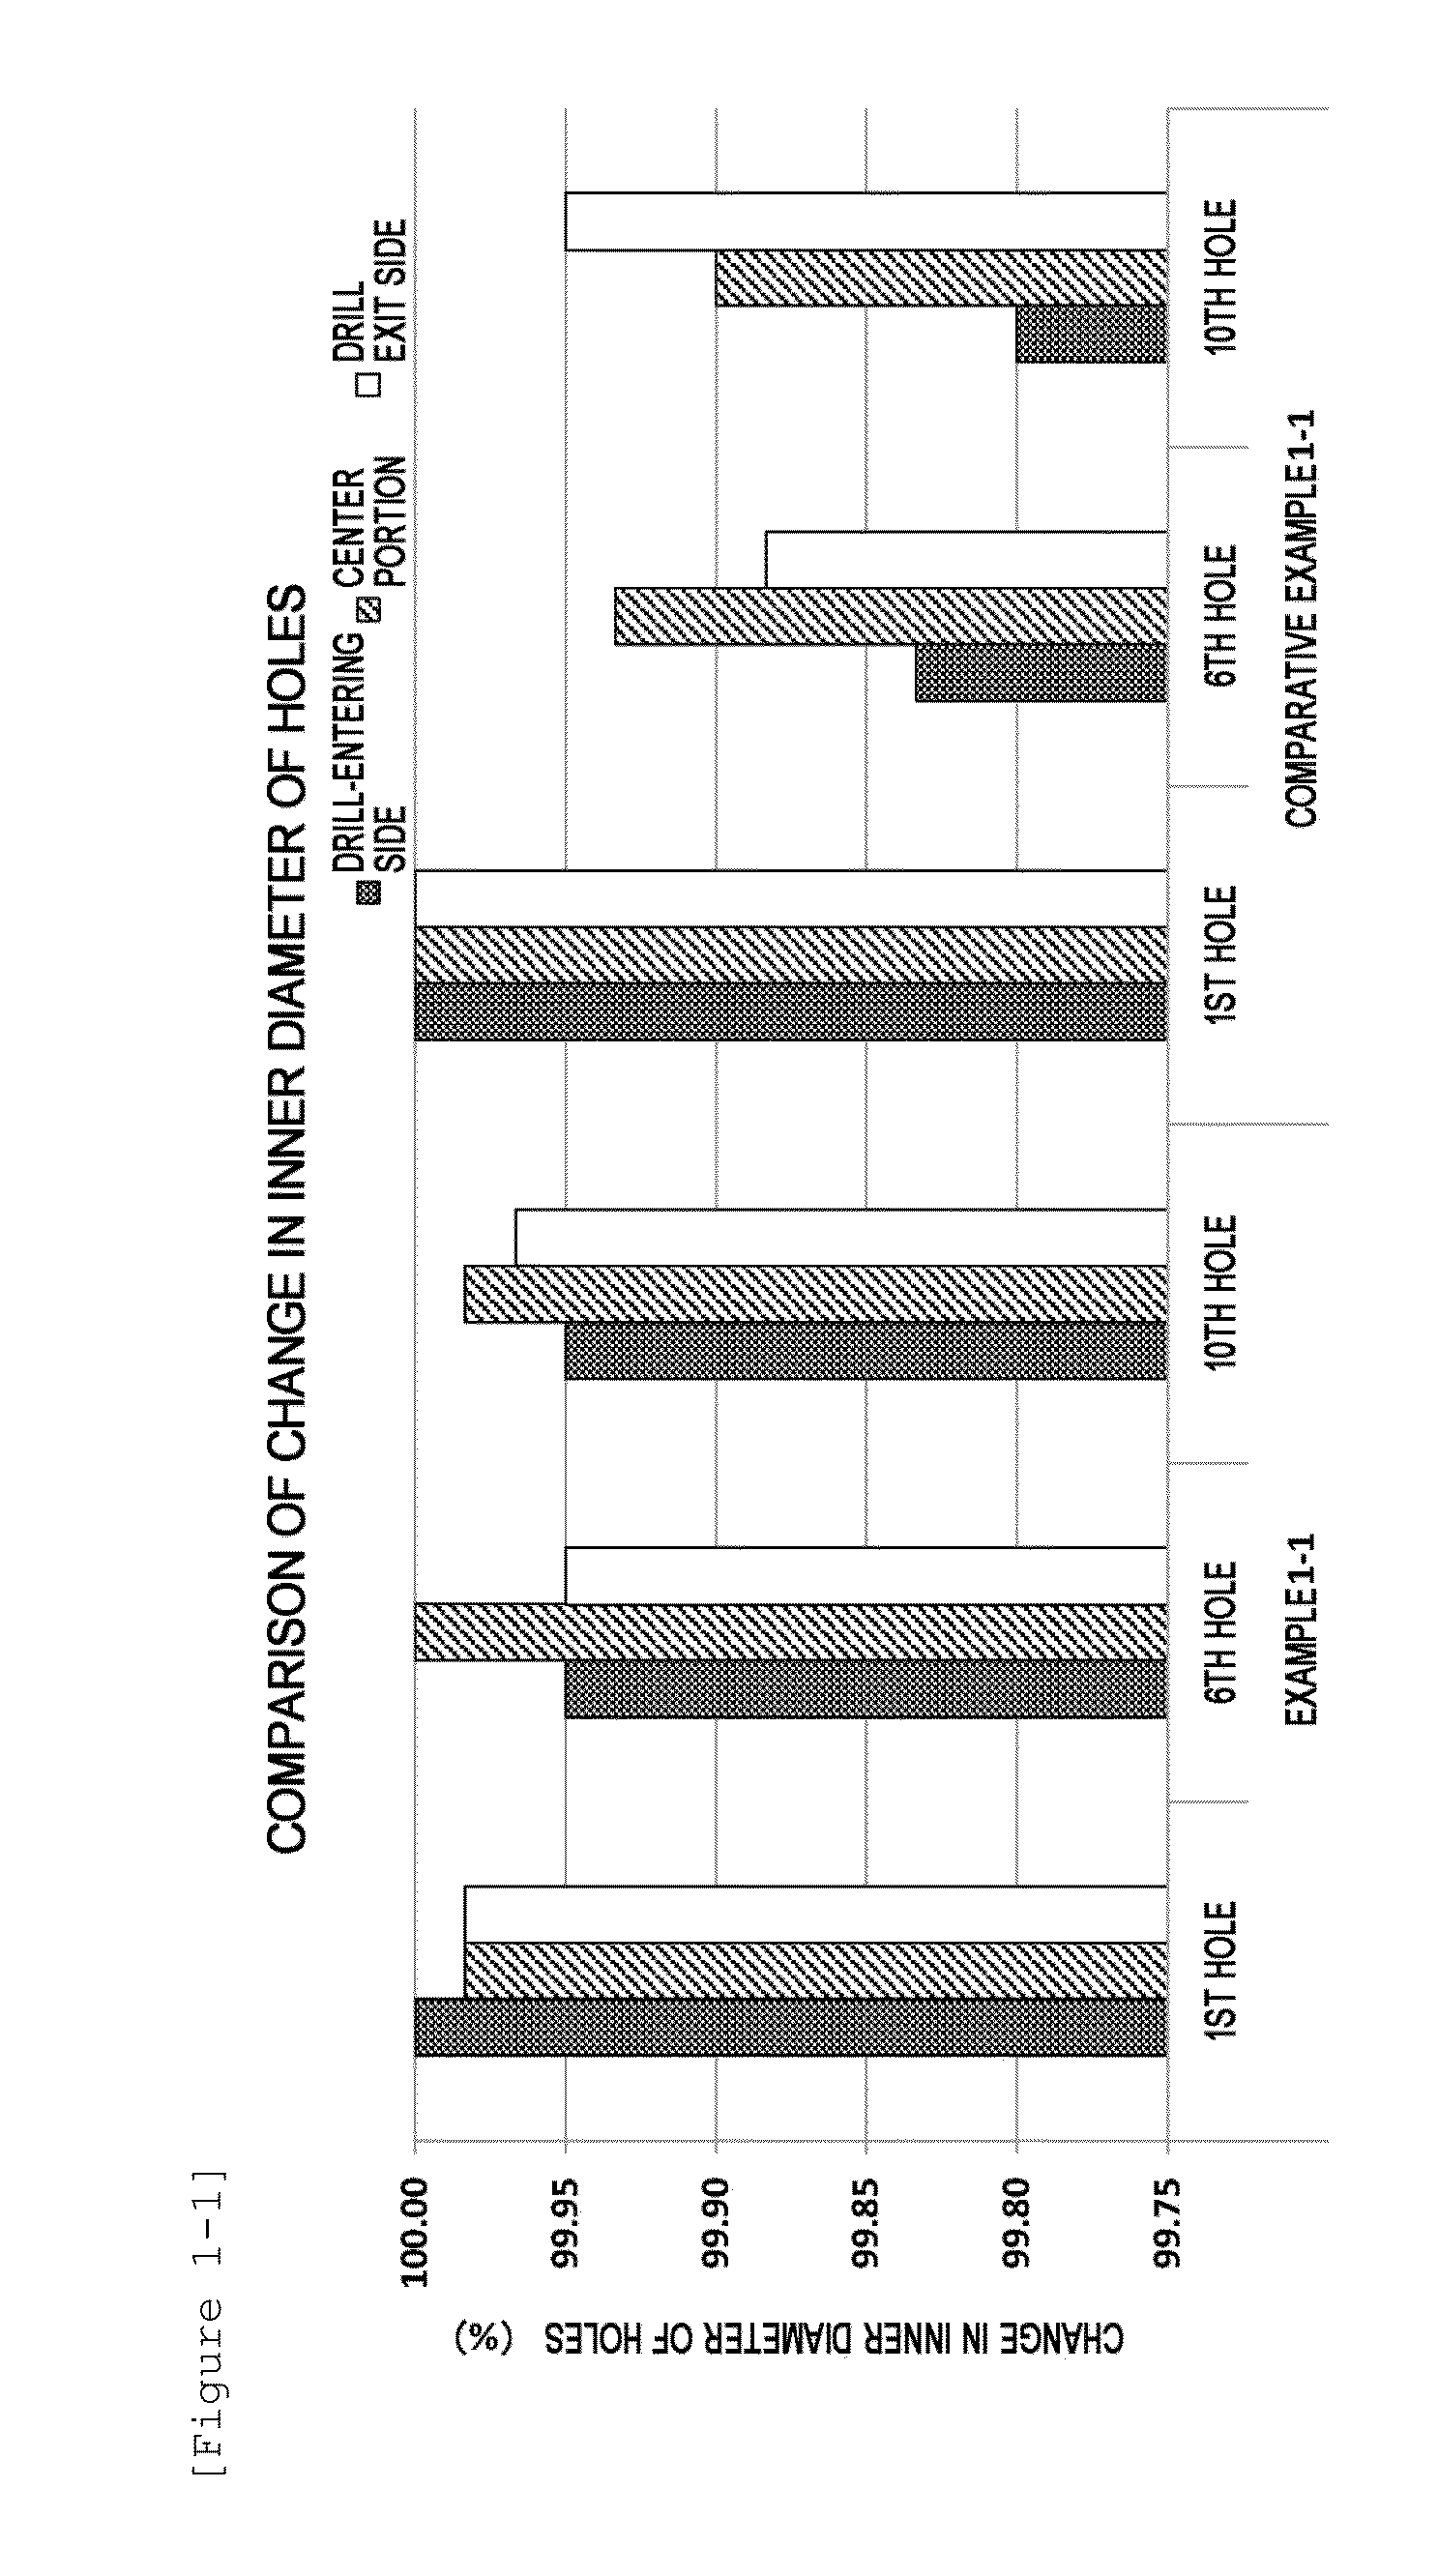 Entry sheet for cutting fiber reinforced composite material or metal, and cutting method for cutting fiber reinforced material or metal